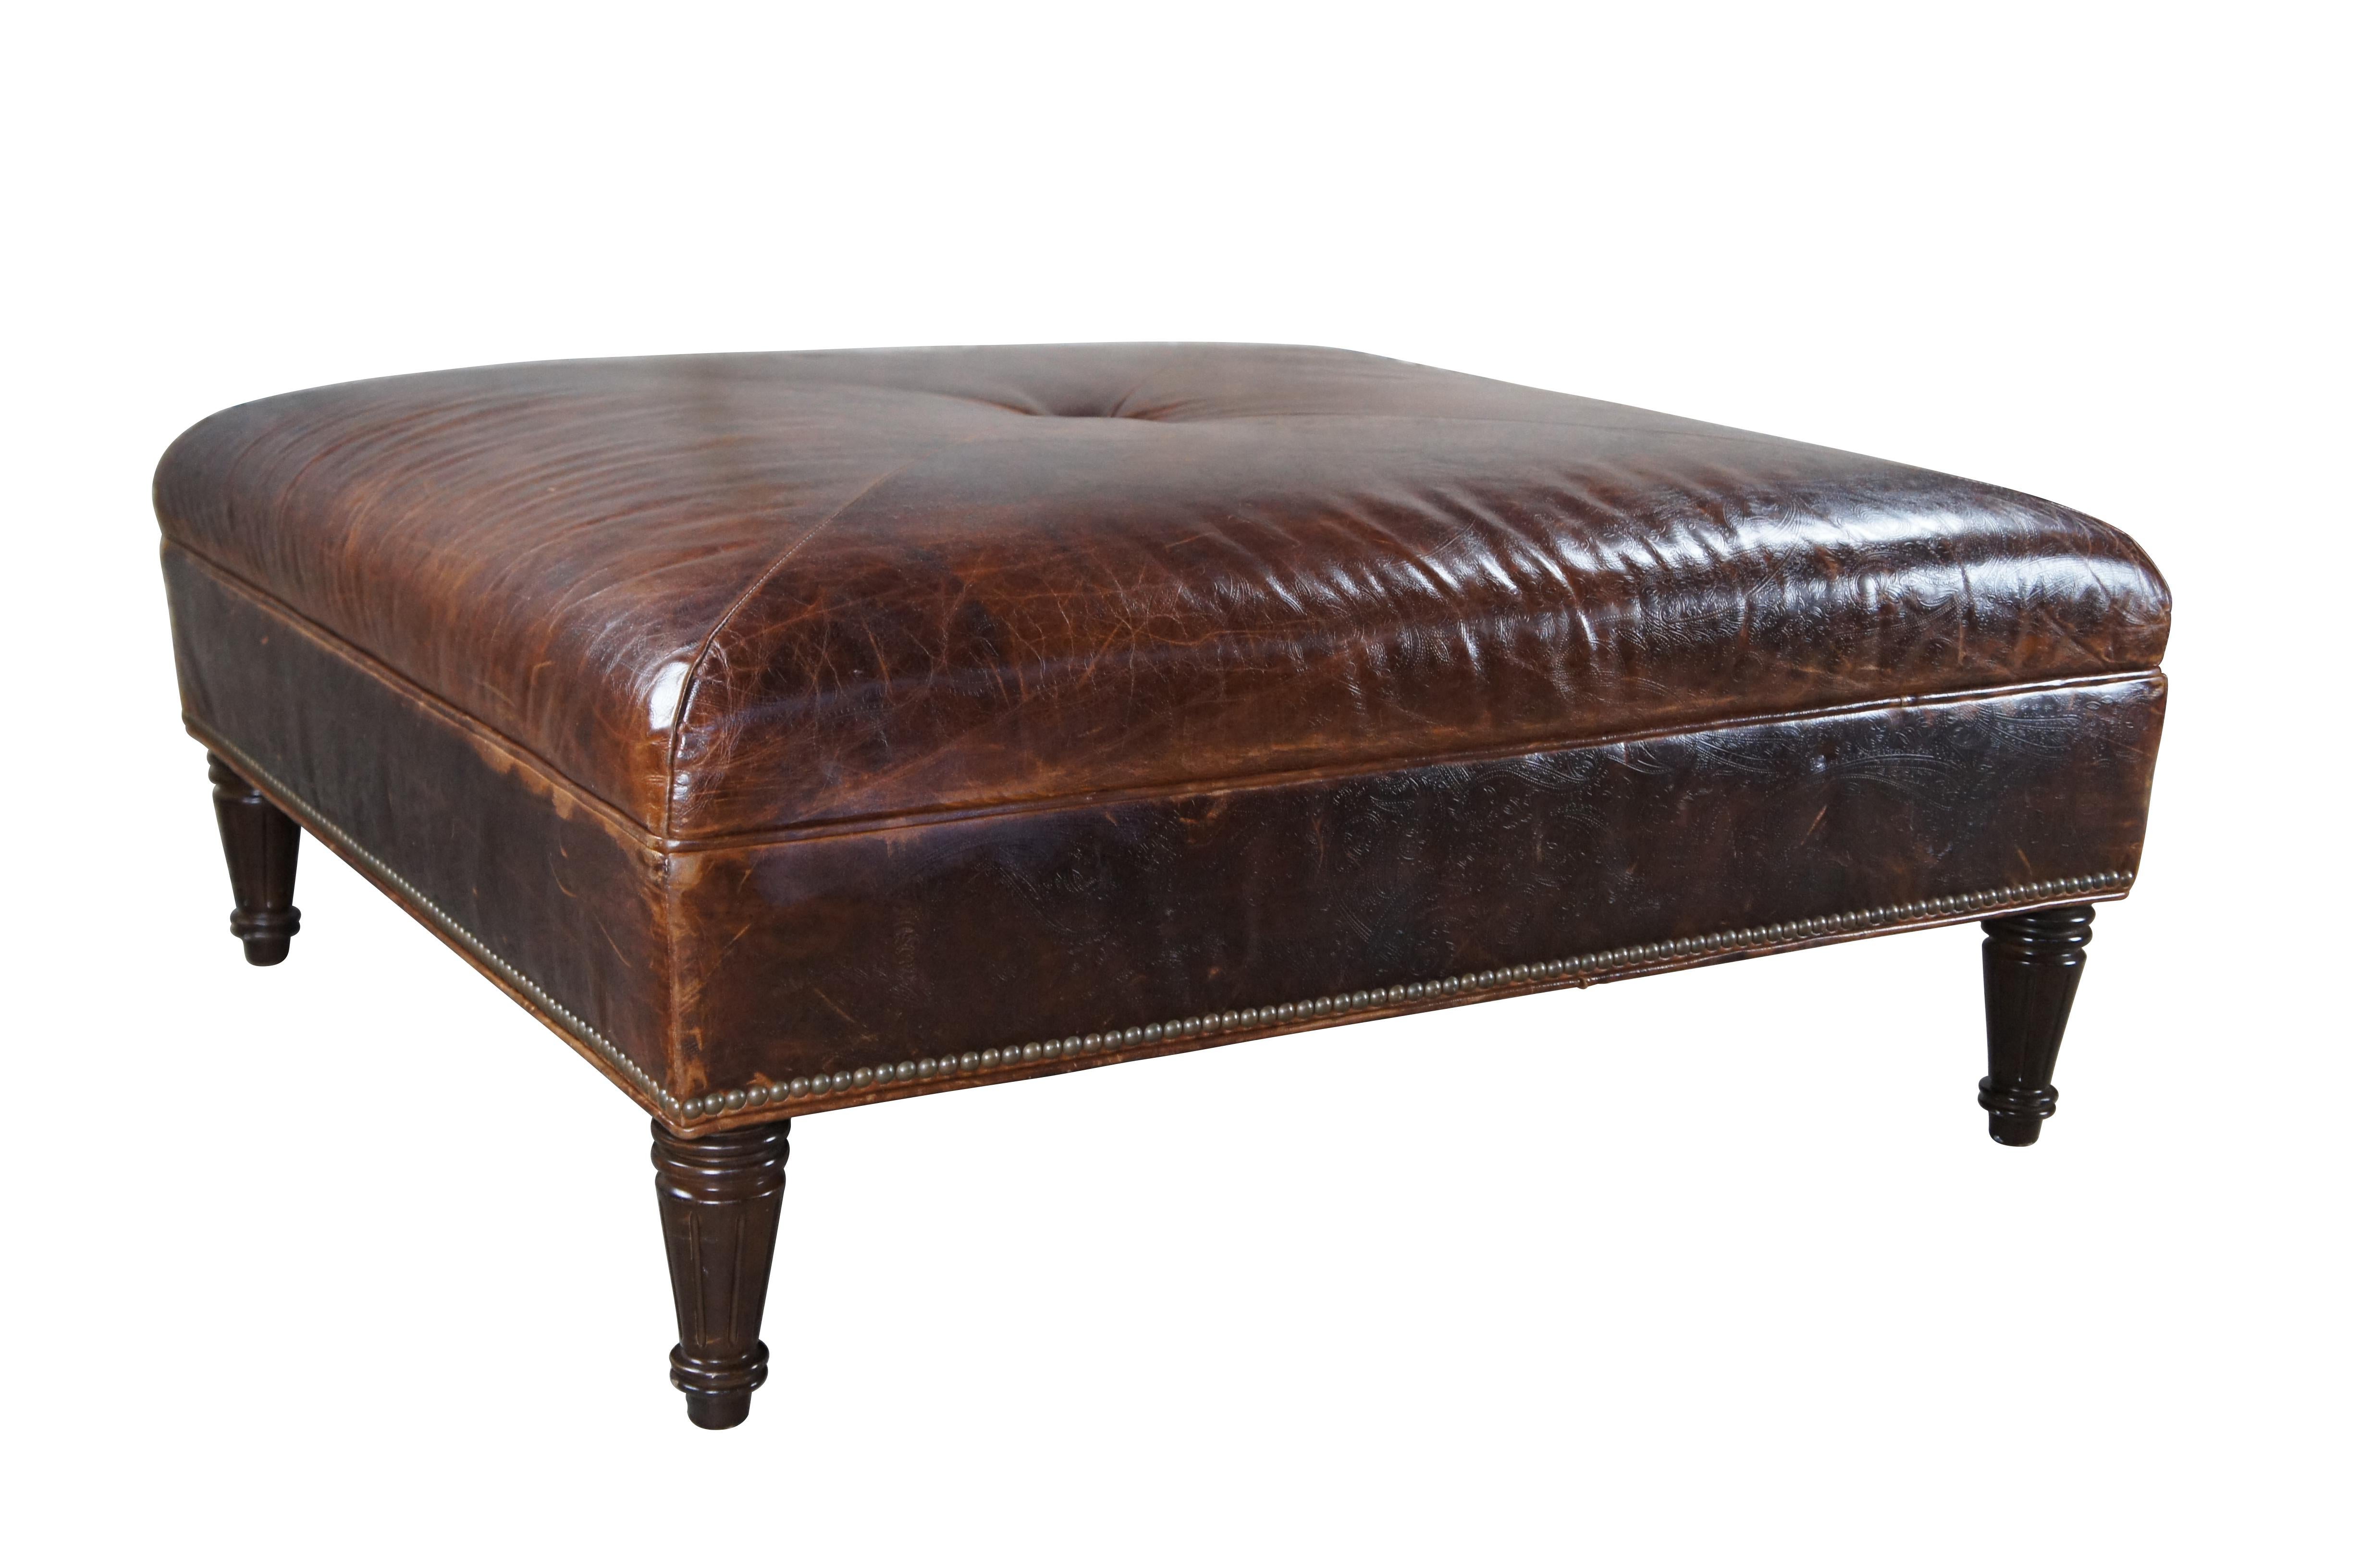 Vintage Vanguard brown leather square ottoman featuring mitered paisley and nailhead design with button tuft.

Vanguard Furniture is a family-owned company that has been making custom furniture since 1969. They have six manufacturing buildings in